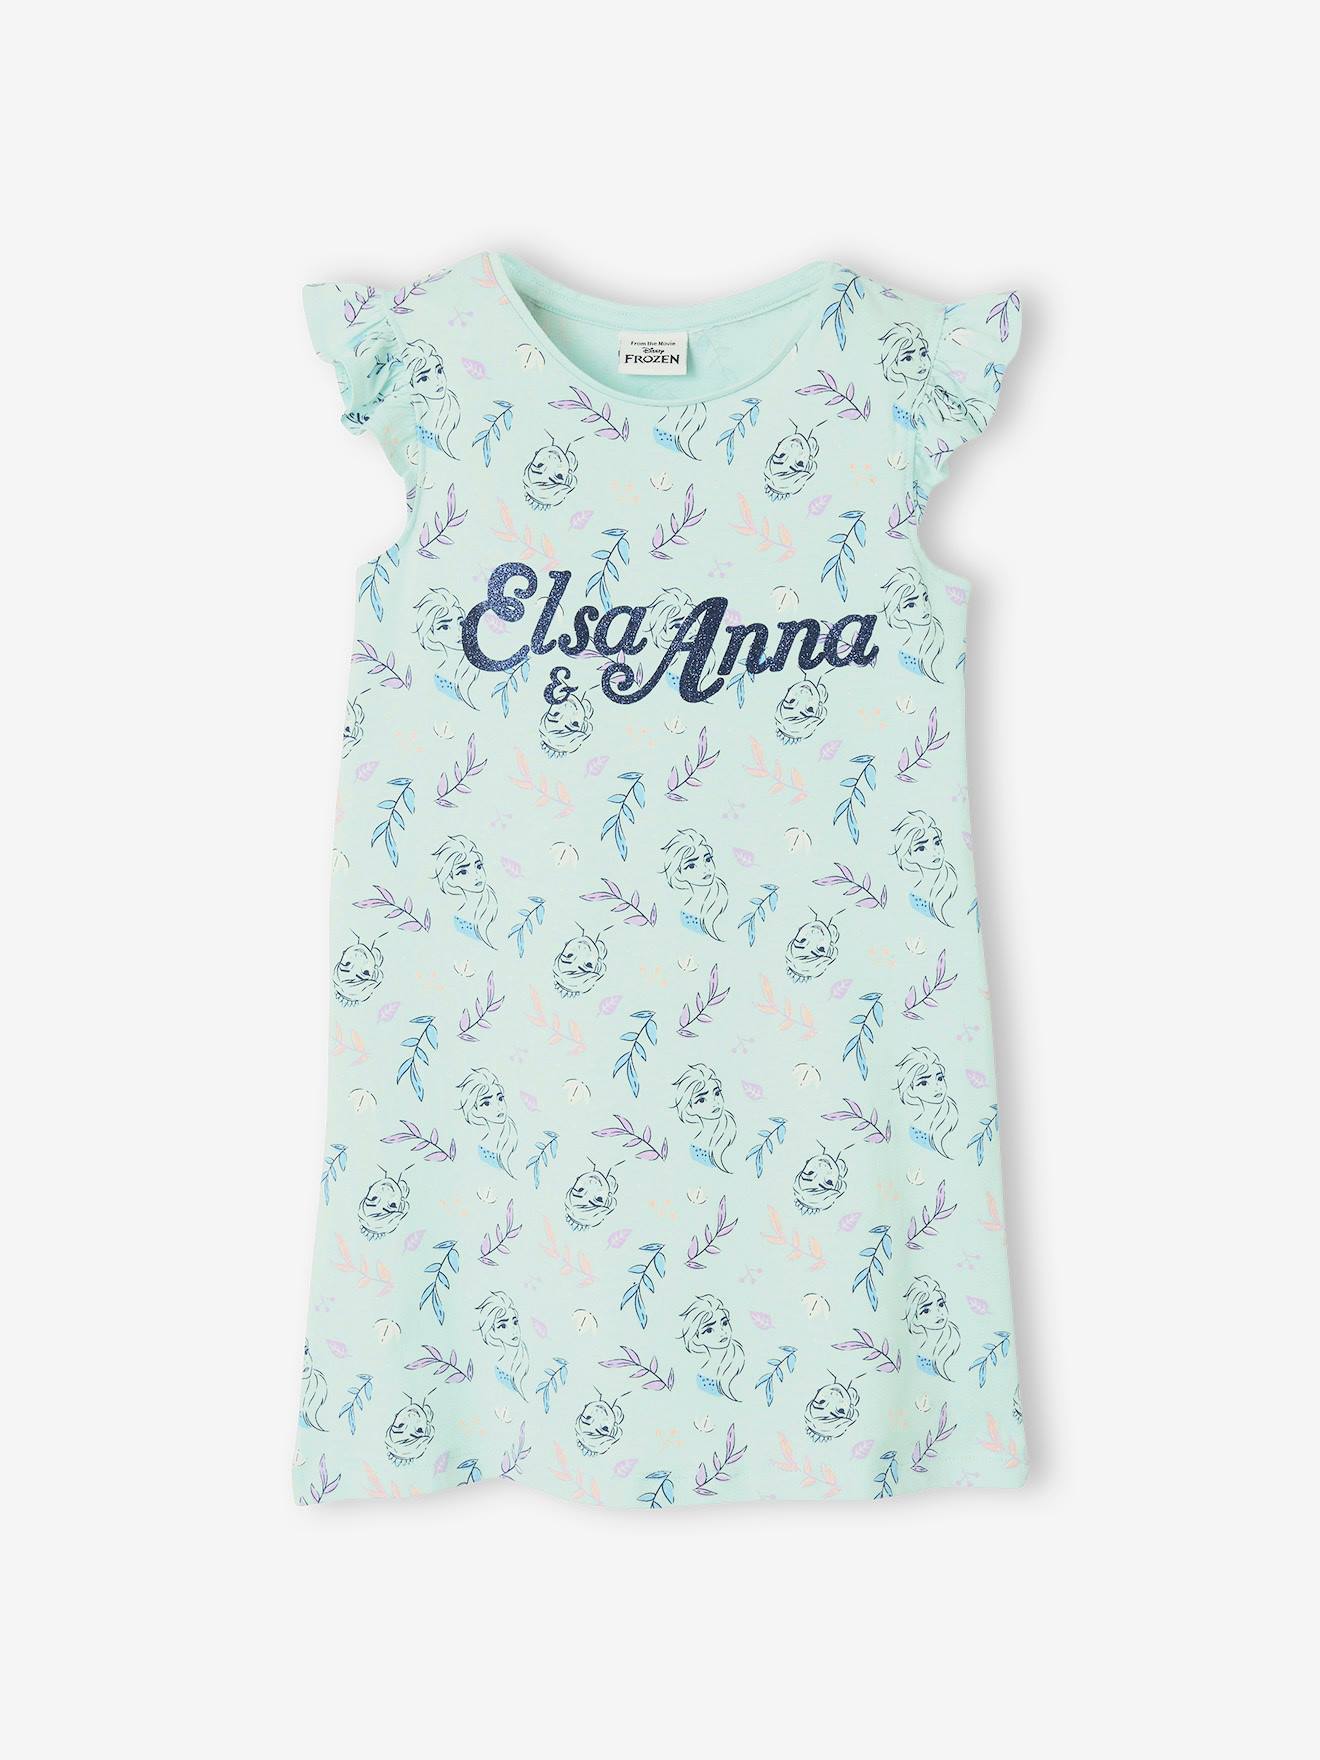 Frozen Nightie for Girls by Disney(r) blue light all over printed